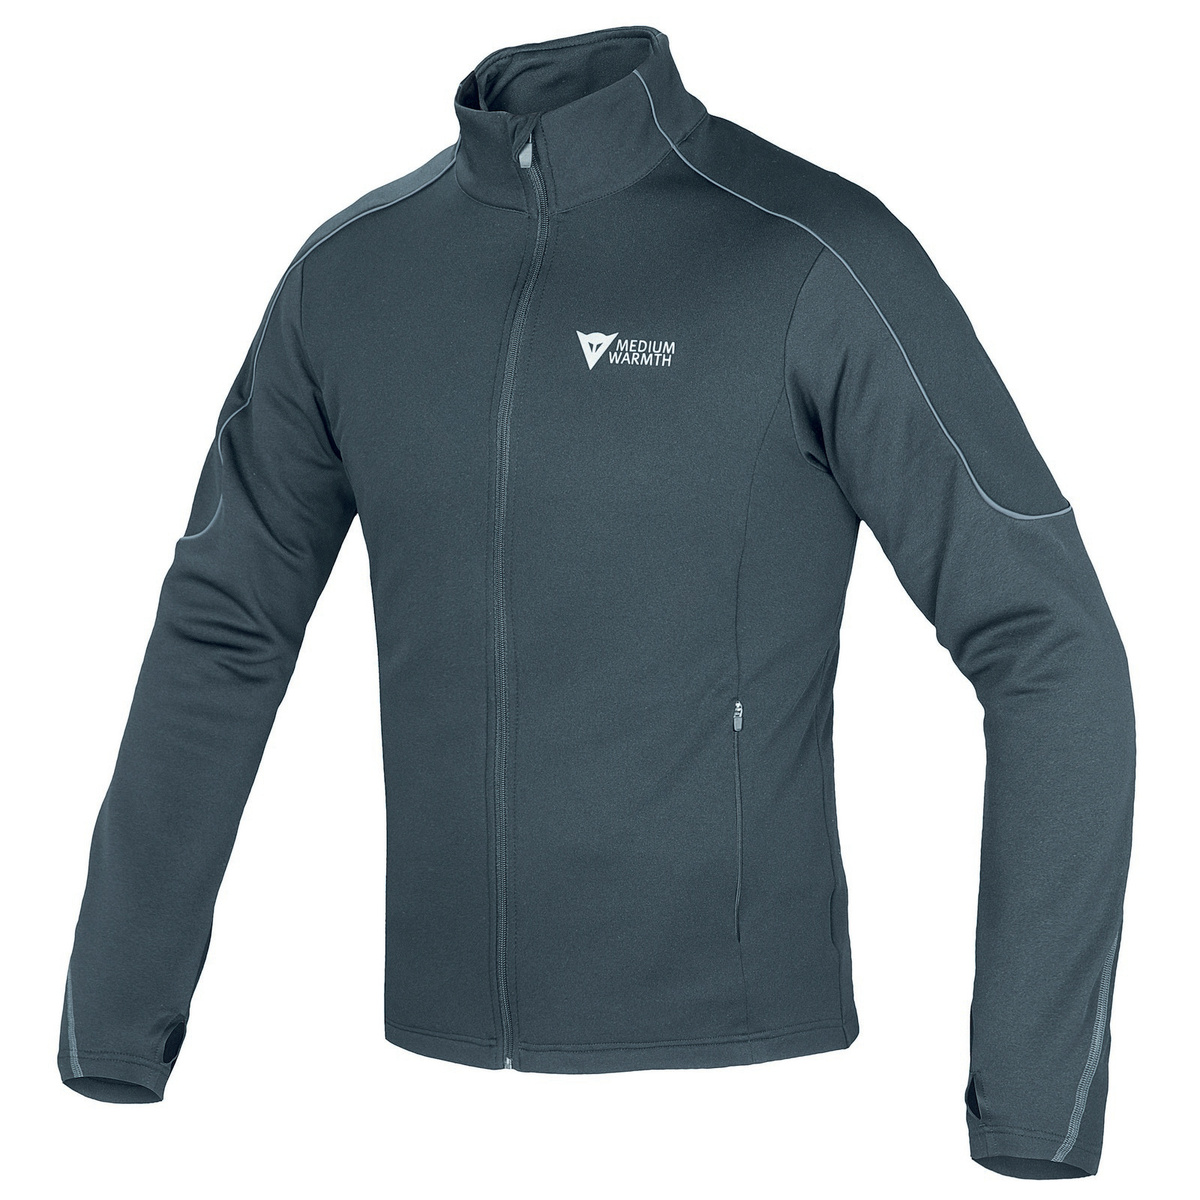 Viewing Images For Dainese D-Mantle Fleece (SOLD OUT) :: MotorcycleGear.com